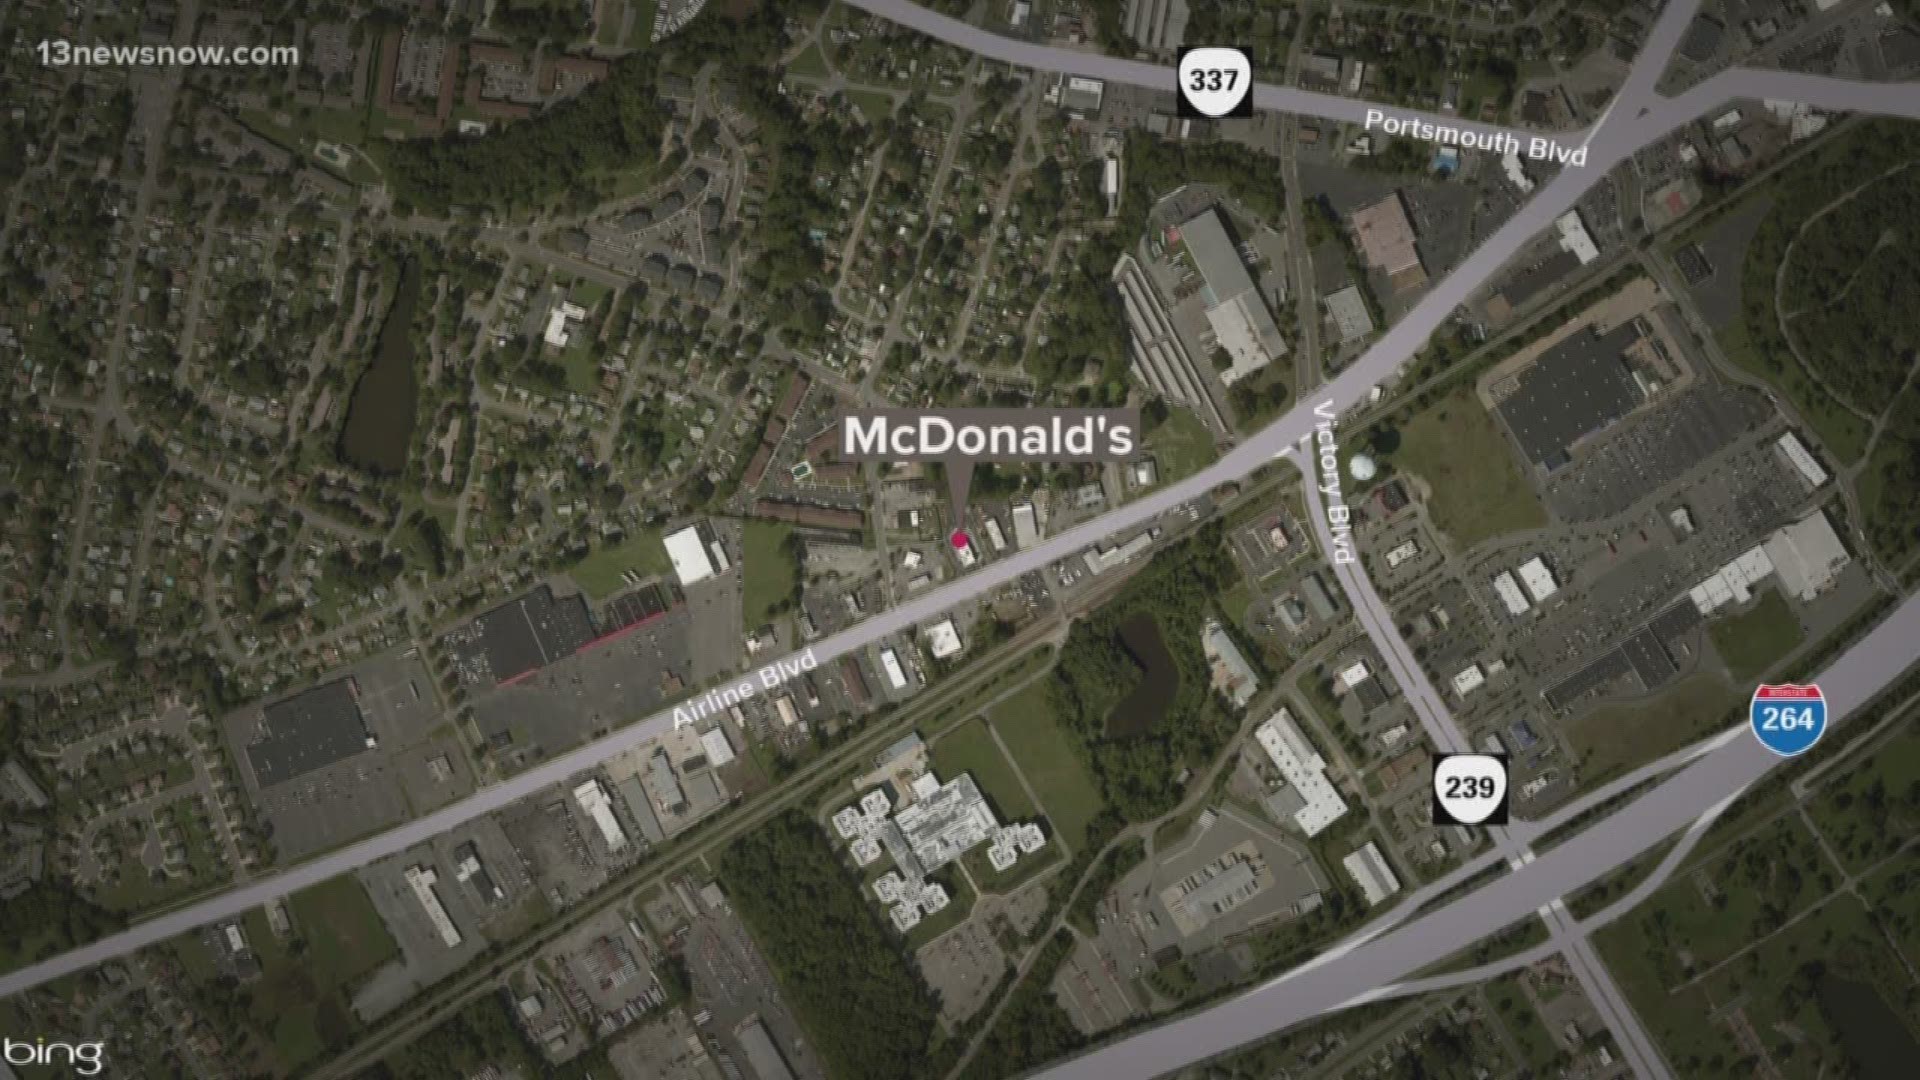 Detectives are investigating an armed robbery at a McDonald's early morning Thursday, Portsmouth police said.